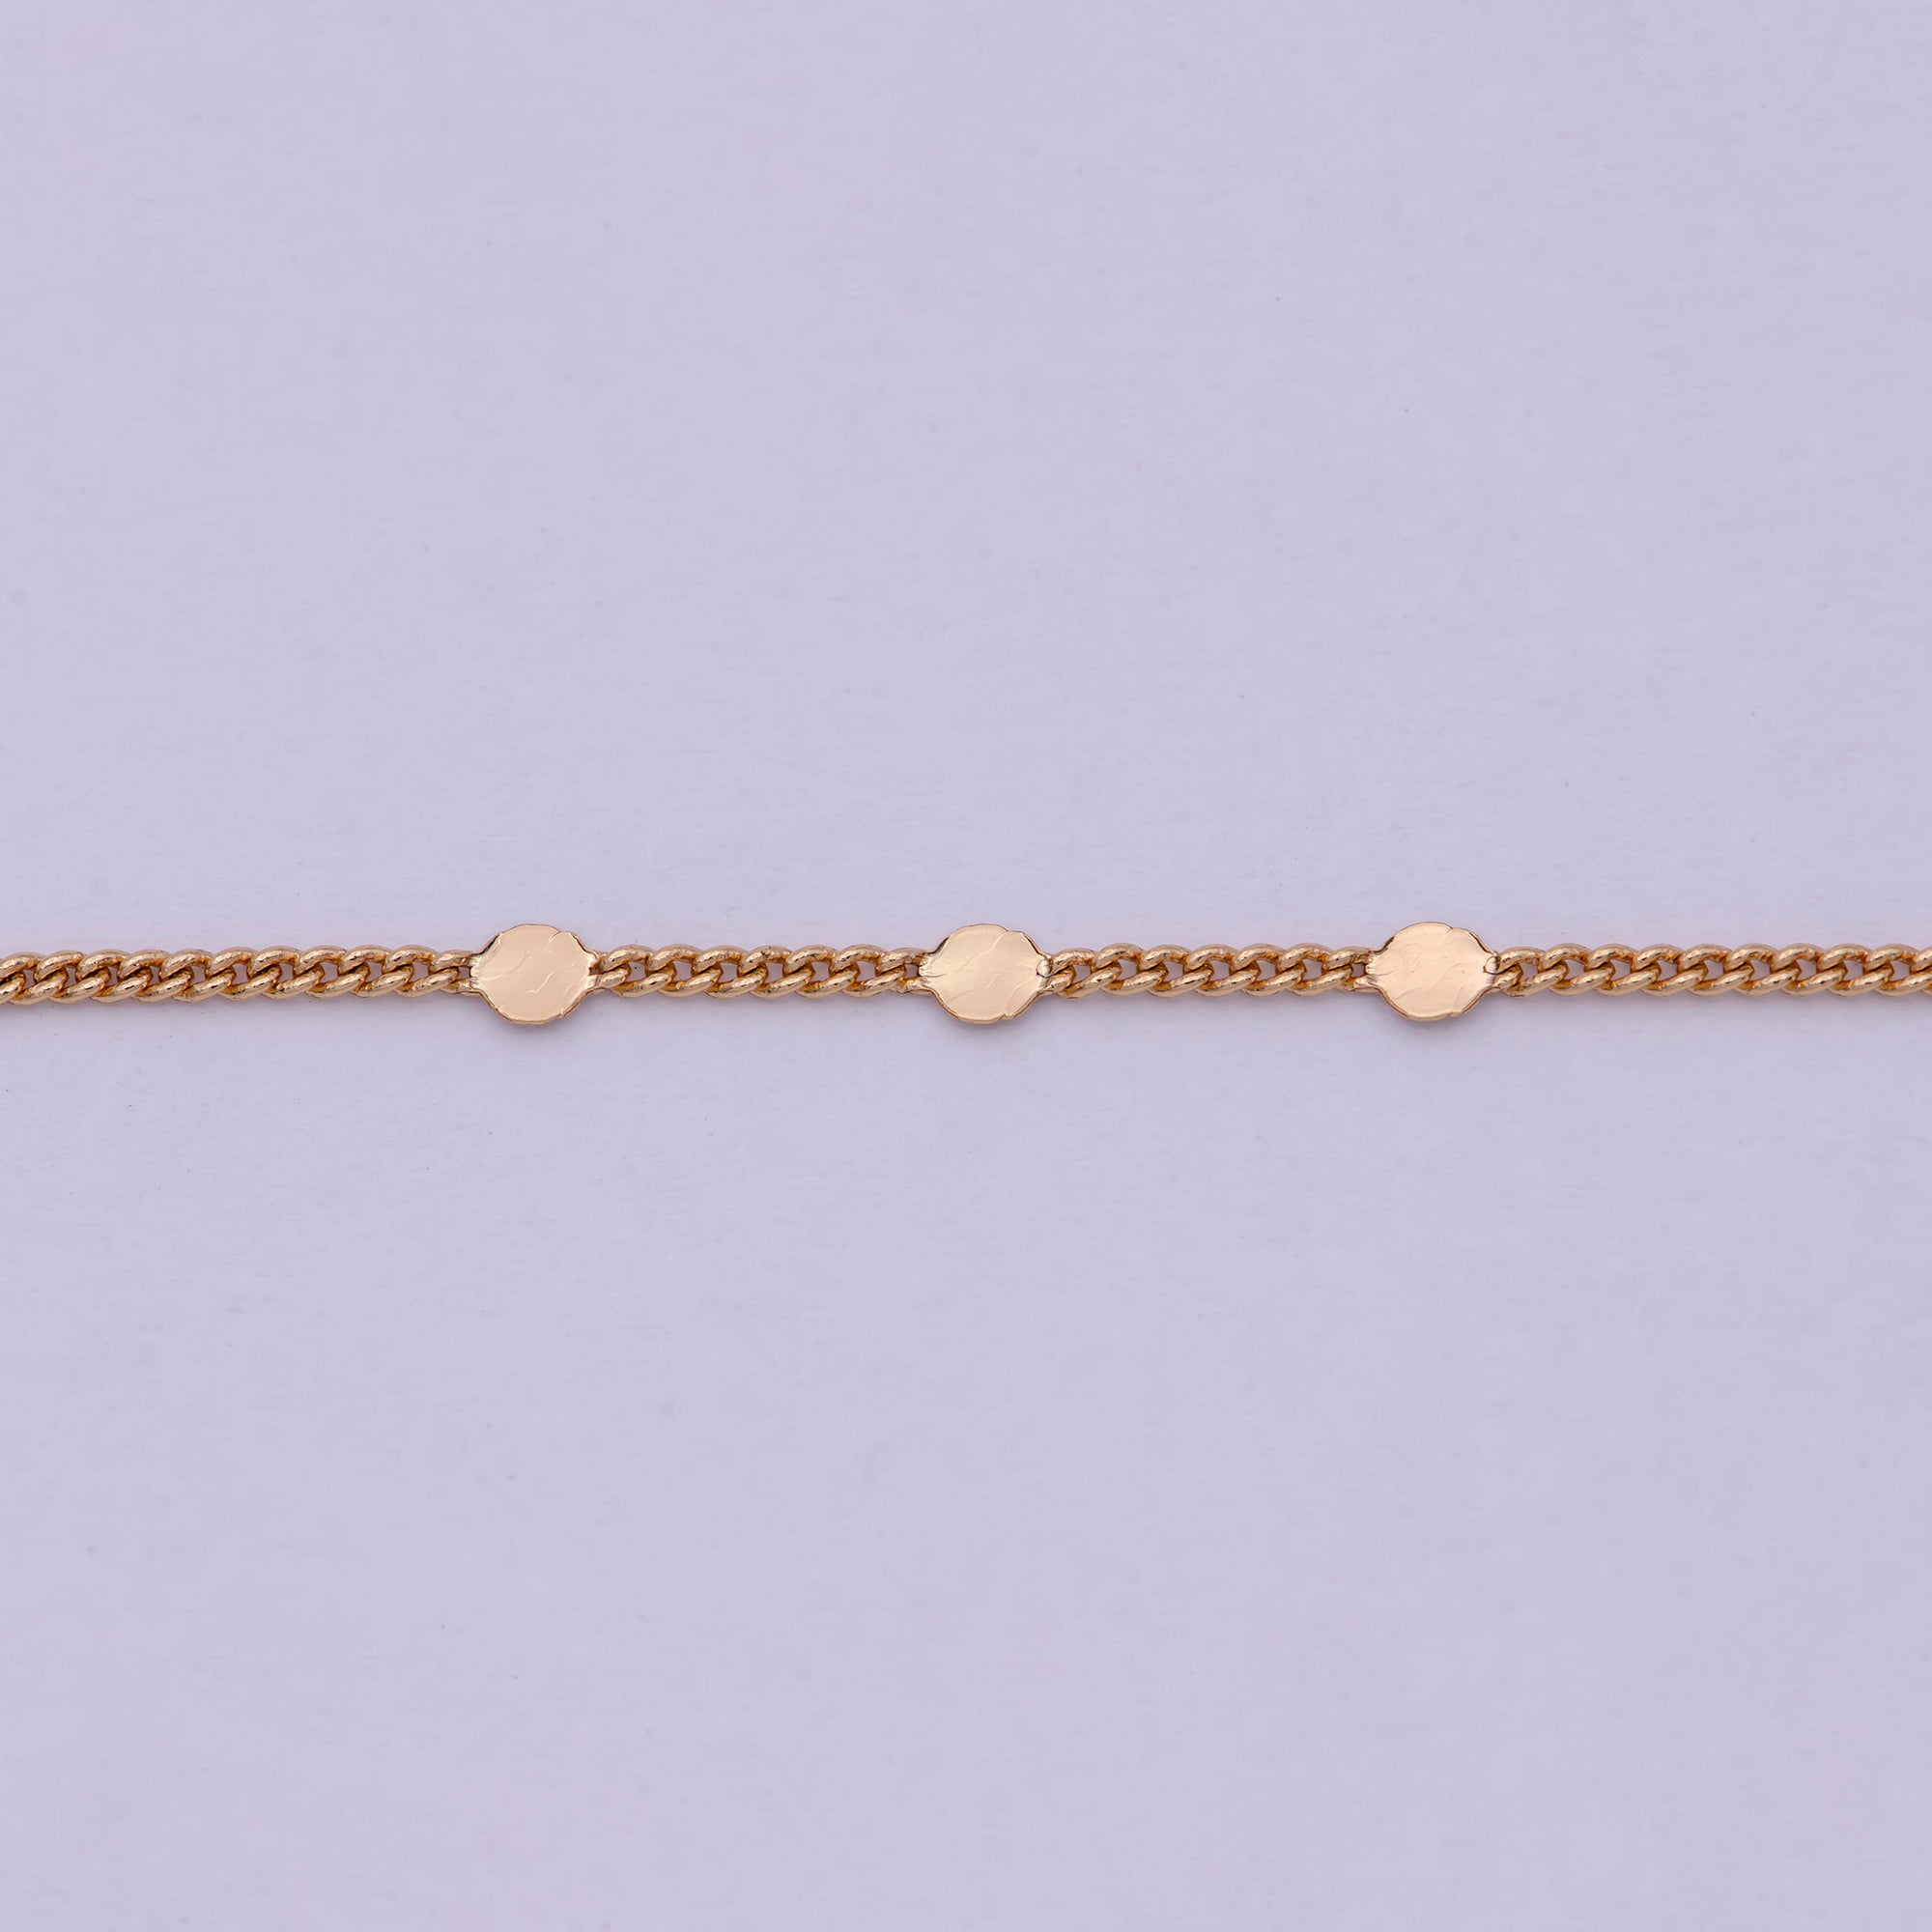 1mm 18K Gold Filled Chain Necklace Gold Curb Chain, Gold Chains 18 inch + 2 inch extender wa-542 - DLUXCA